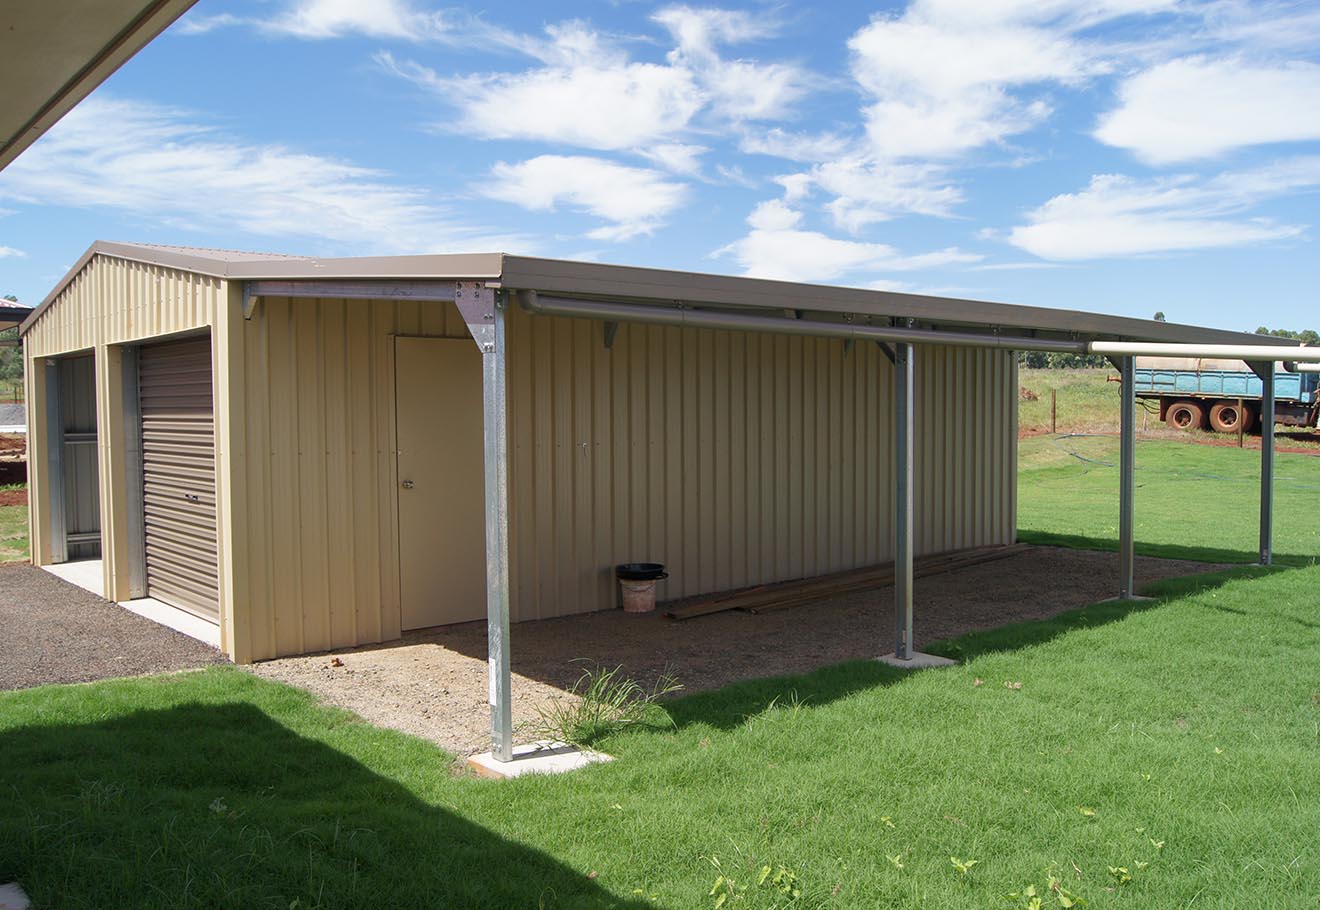 Two door shed with carport section